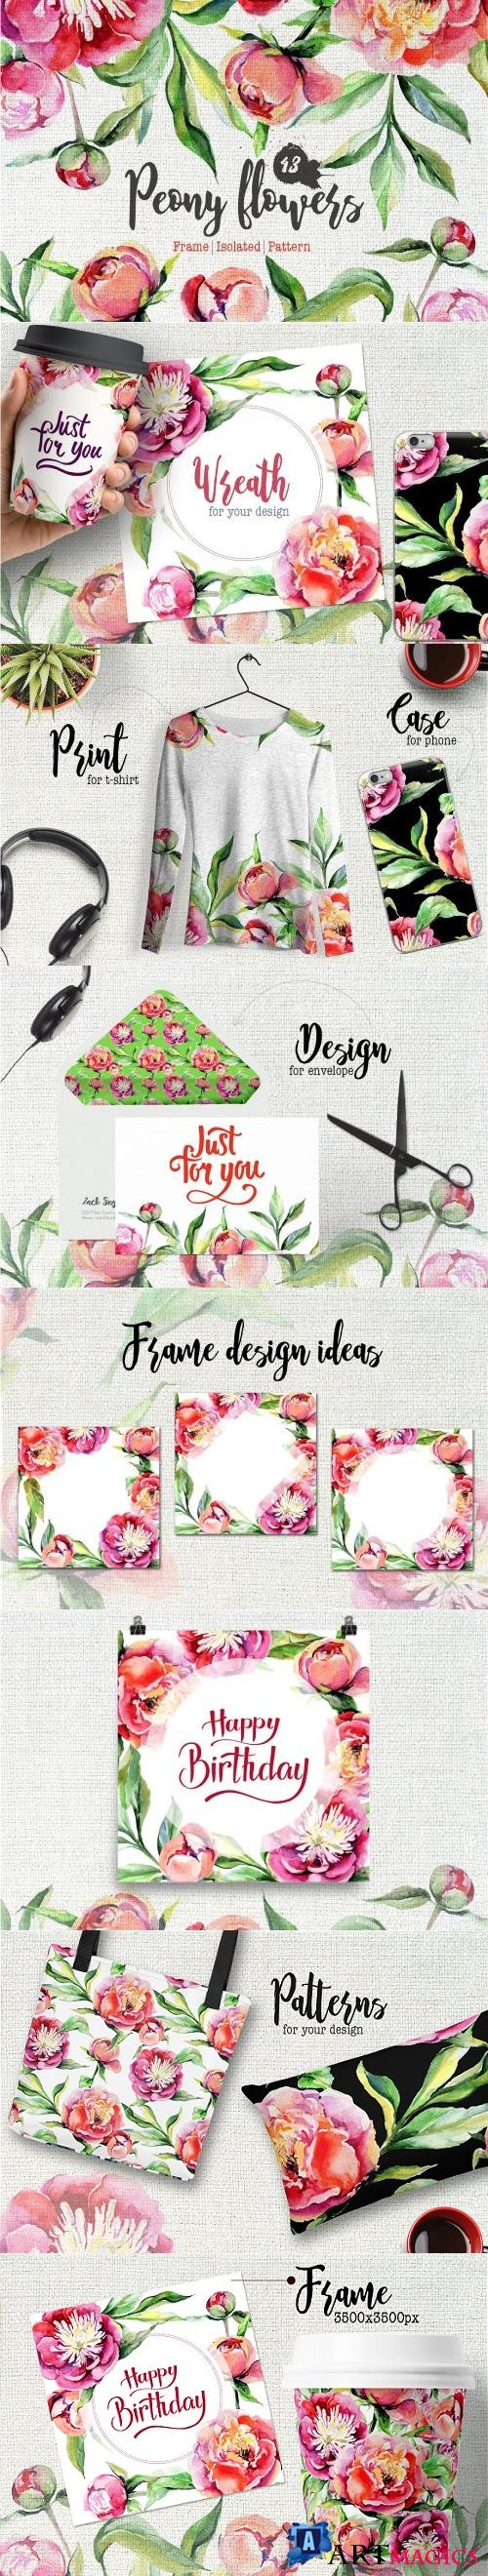 Peony flowers PNG watercolor set - 1945233